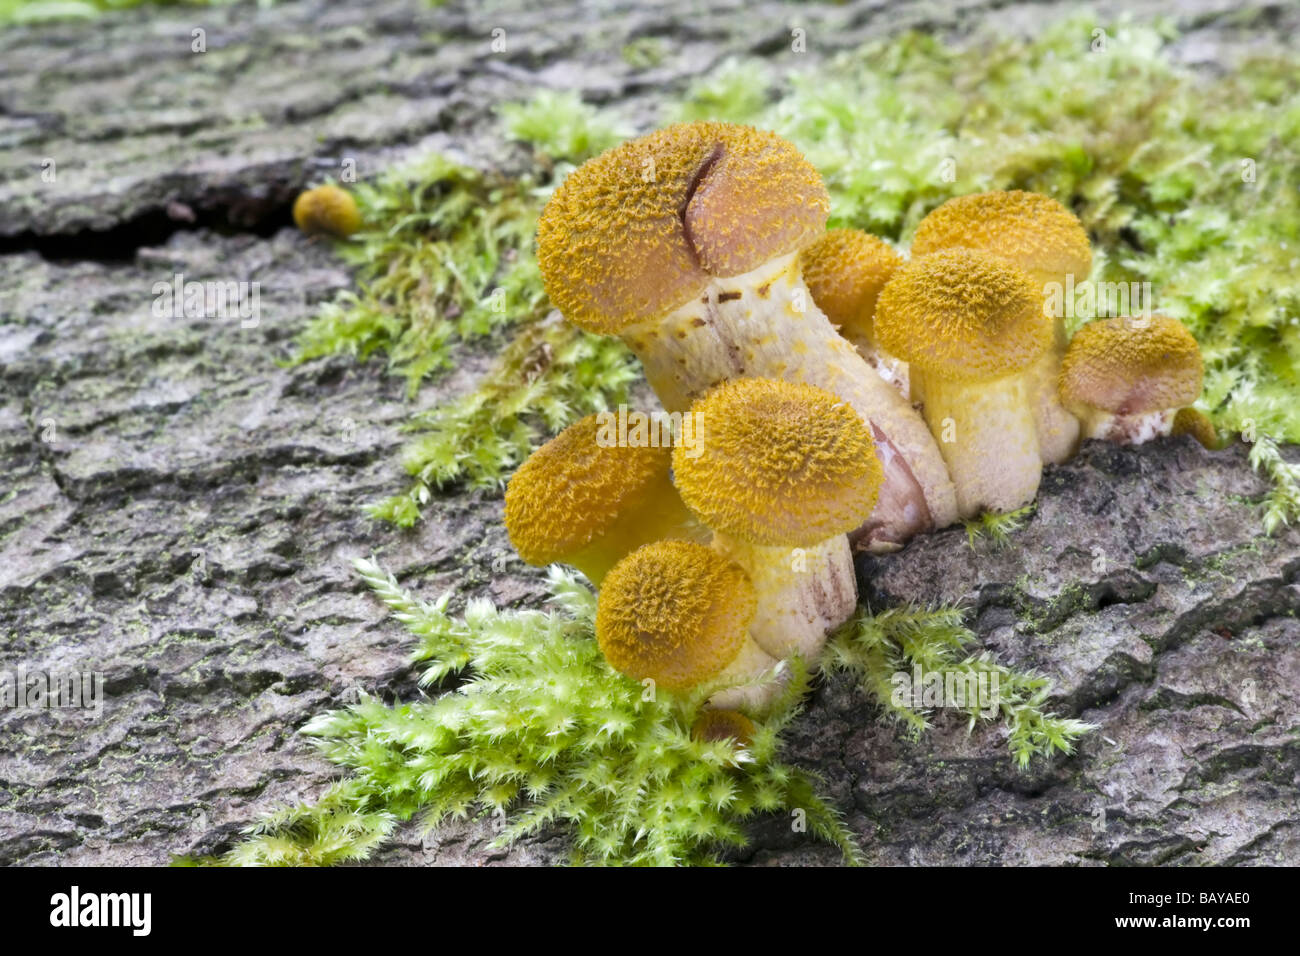 Honey or Boot lace Fungus Stock Photo